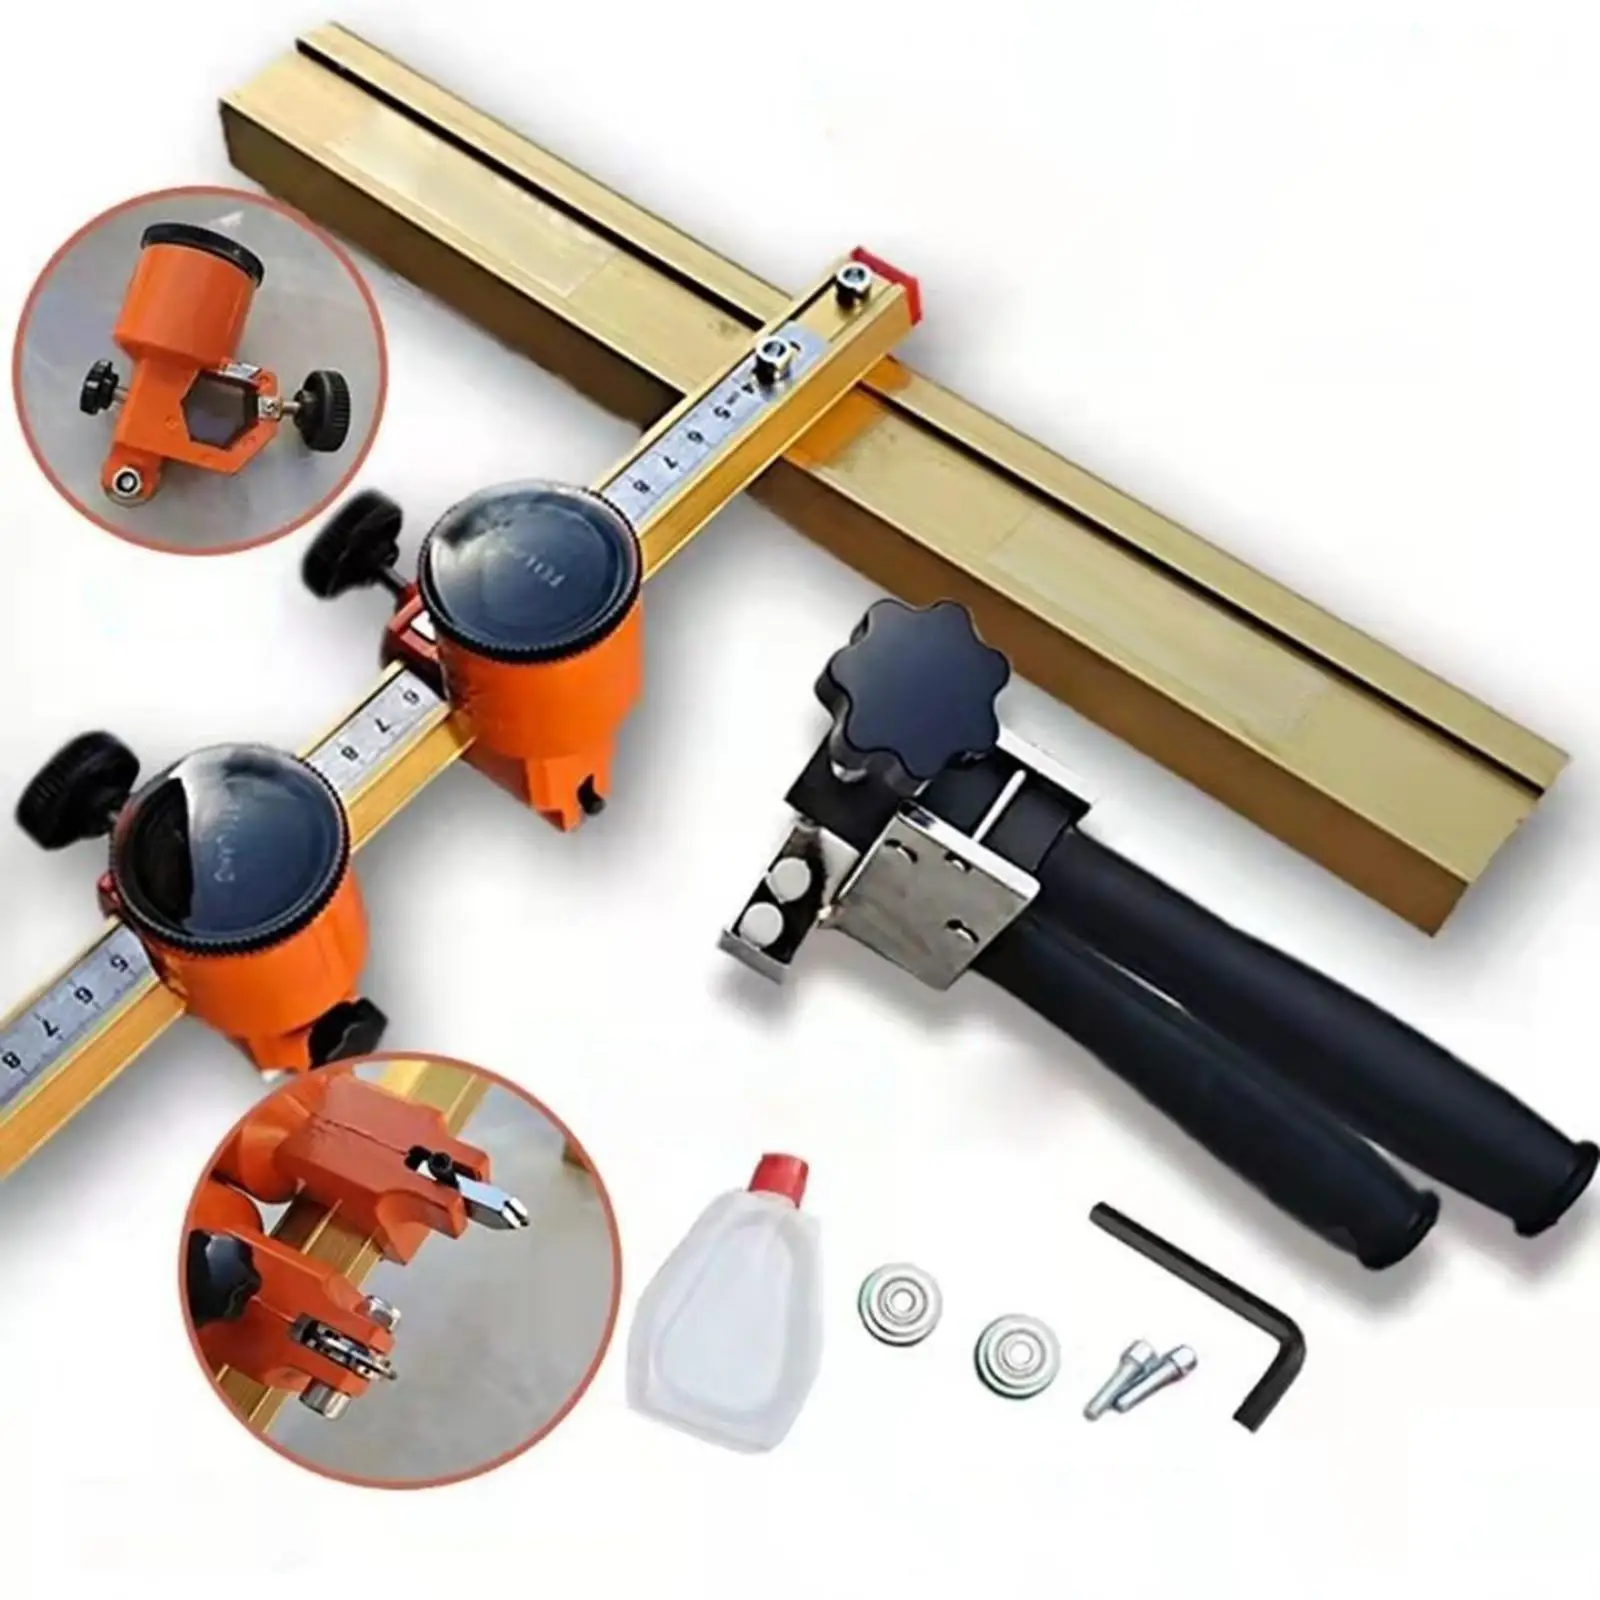 Glass Cutter Strong Glass Cutting Knife Glass Tile Cutter DIY Ergonomic Self Controlled Oiling for Mirrors Floor Tile